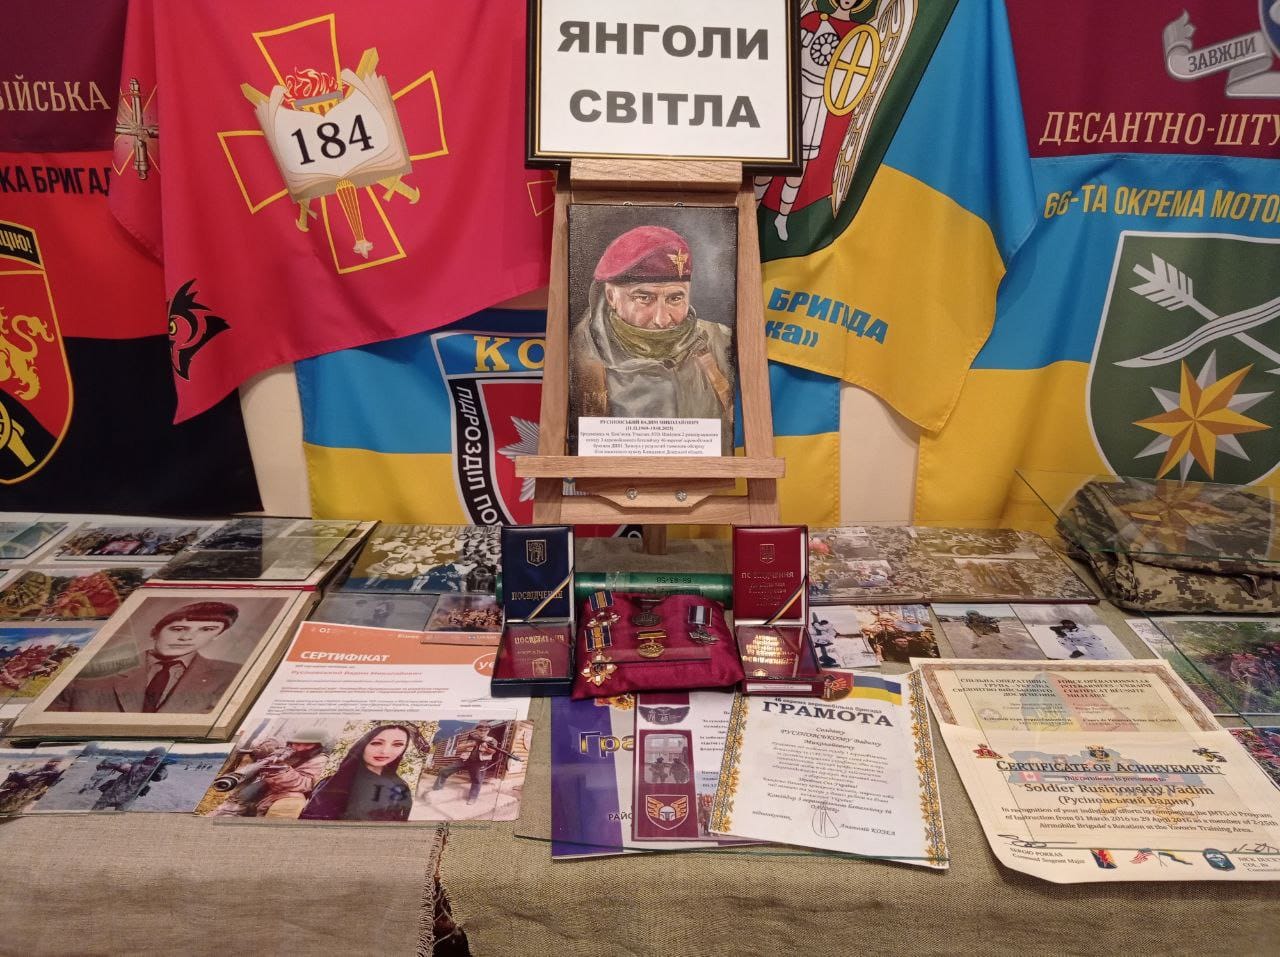 An exhibition in memory of the residents of the Kamianka Community killed in the russian-Ukrainian war